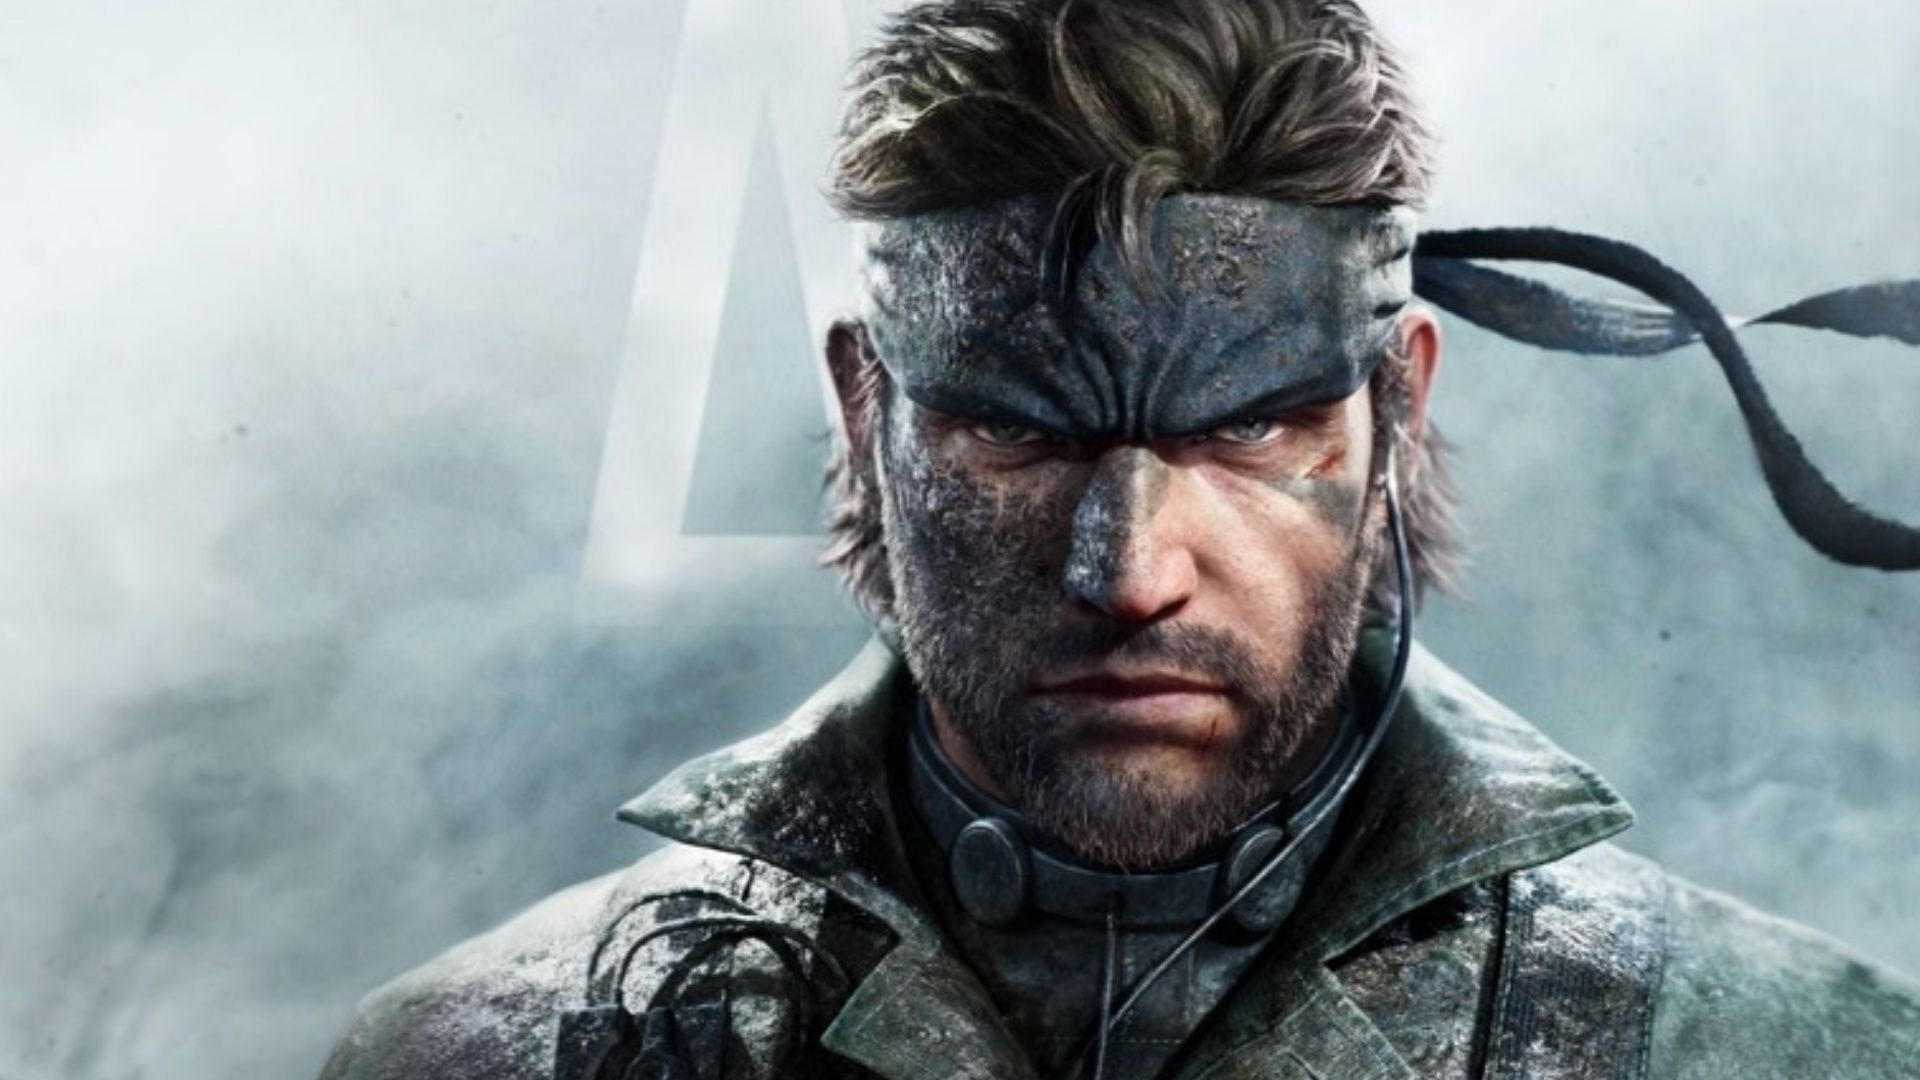 Metal Gear Solid Delta: Snake Eater&rsquo;s graphics look absolutely stunning (Image via Konami)